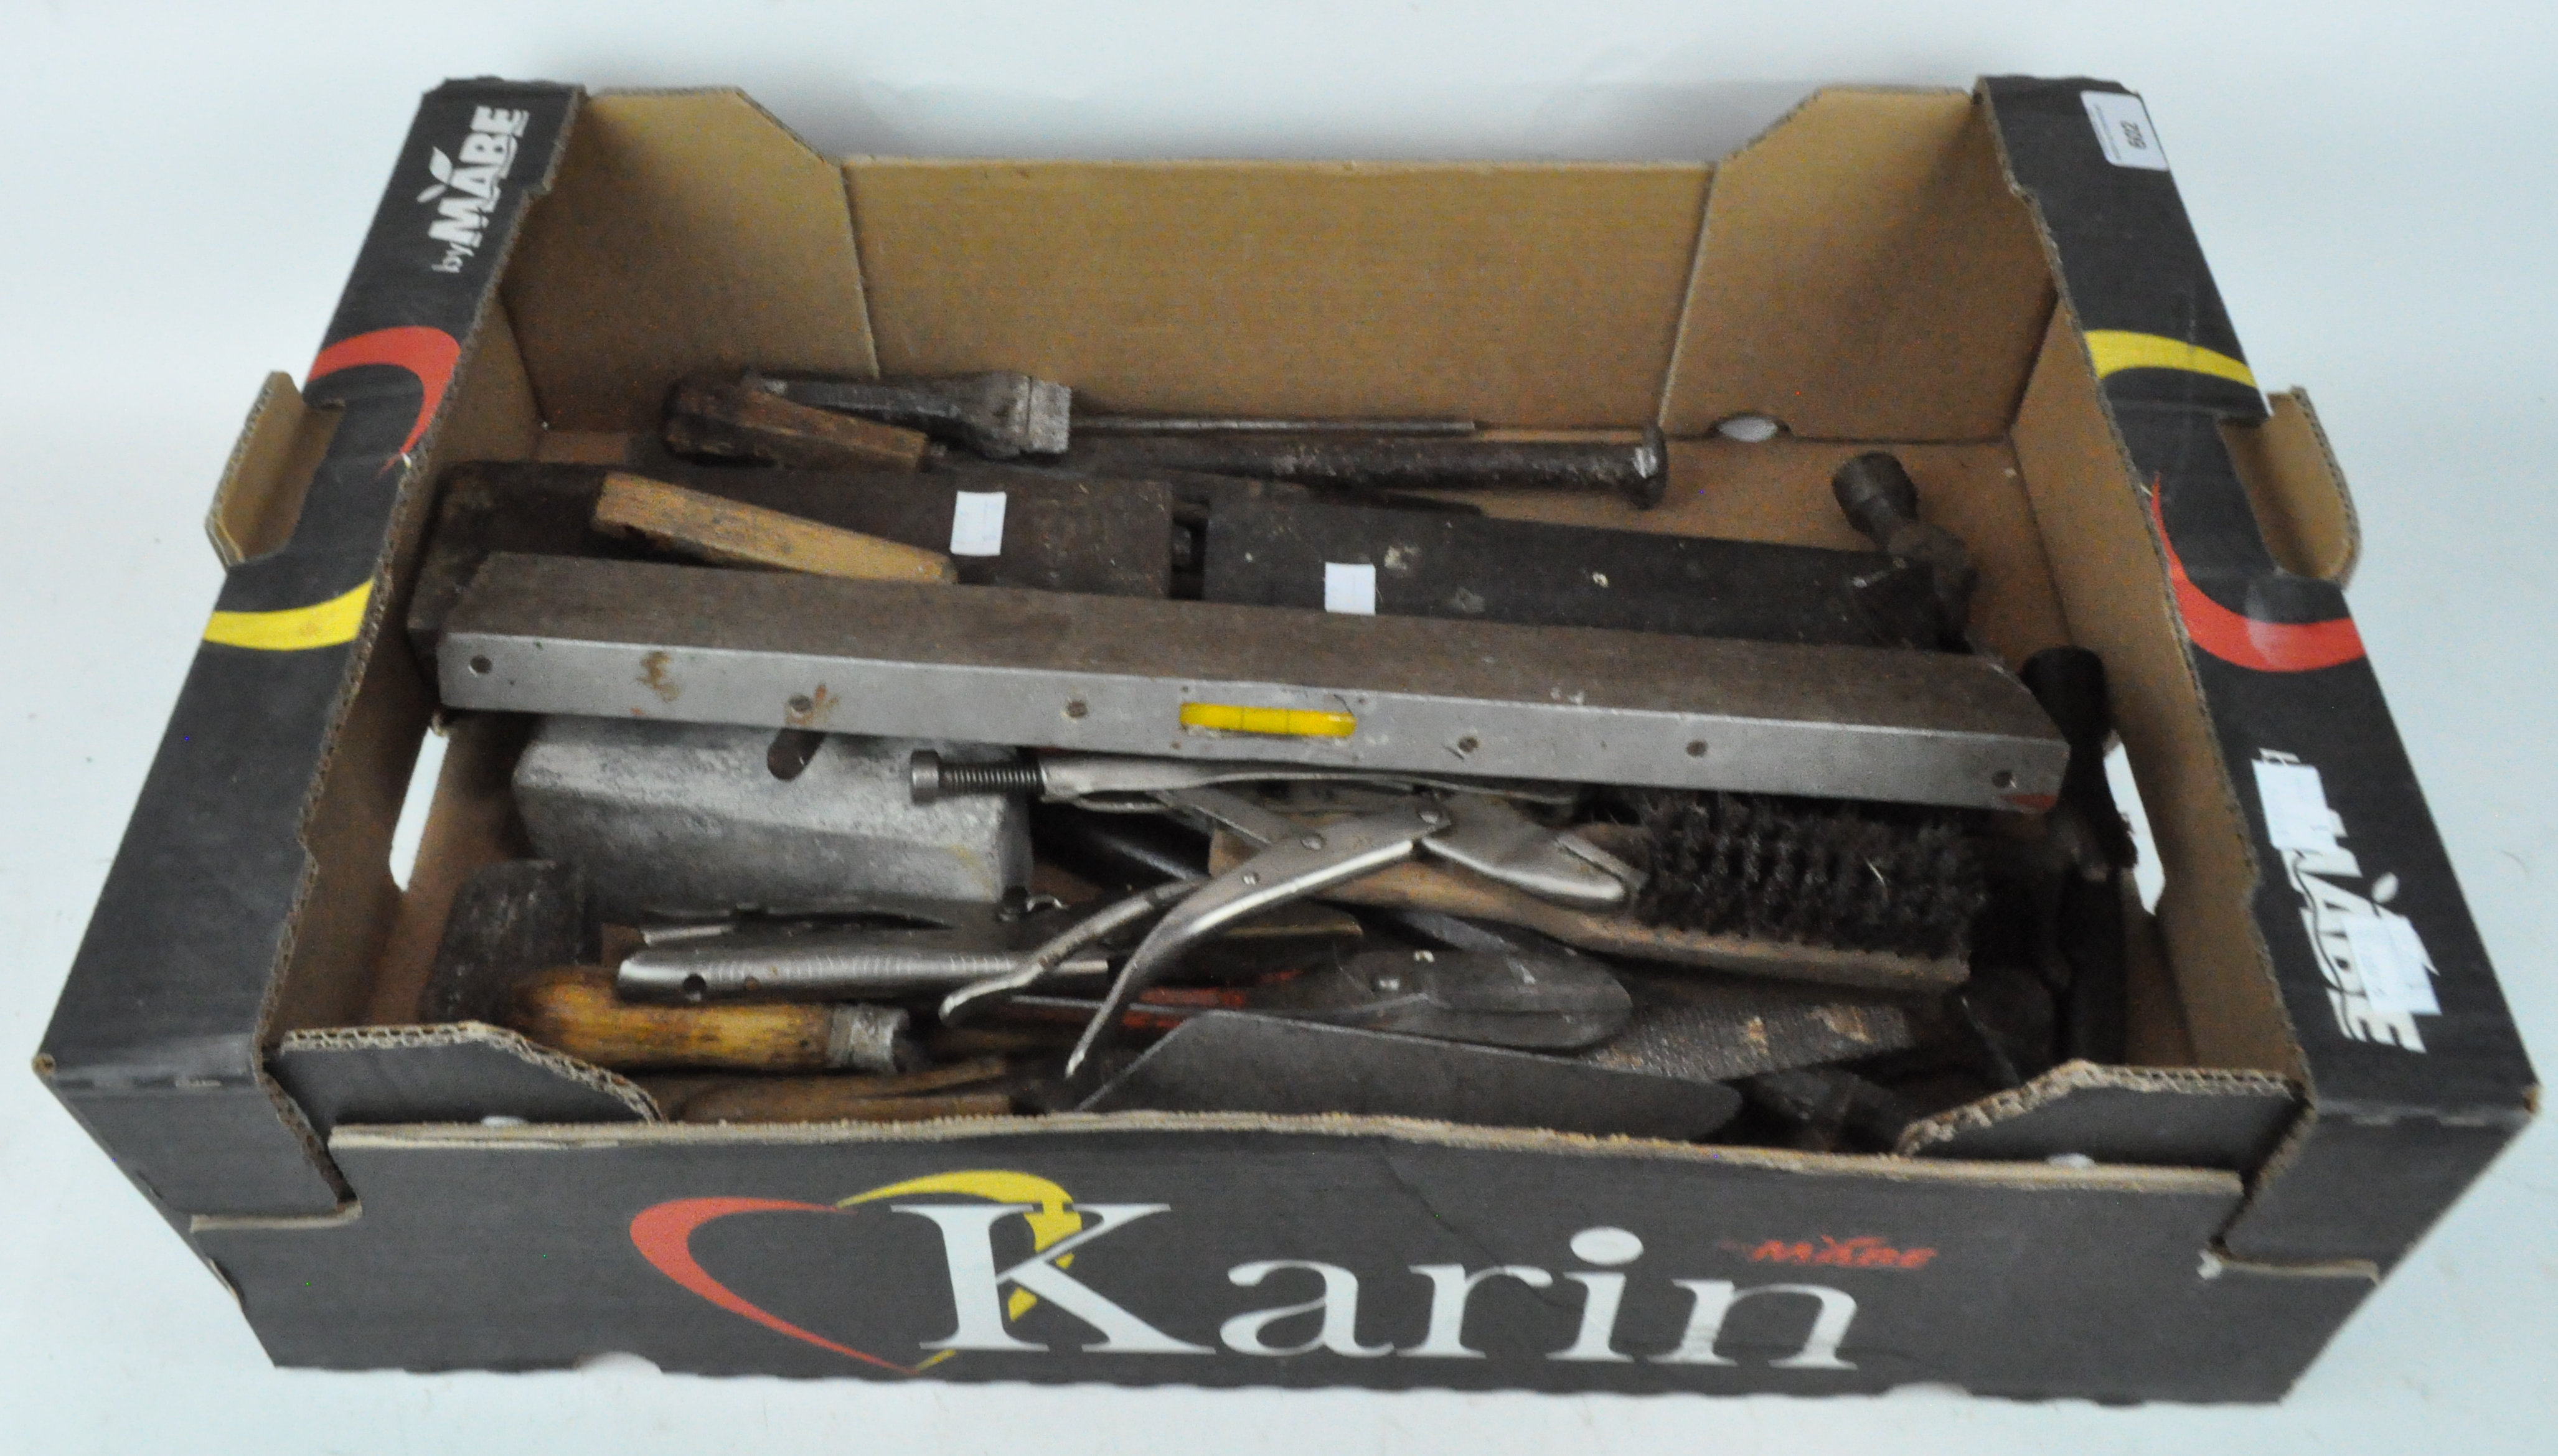 A large G clamp and a box of tools